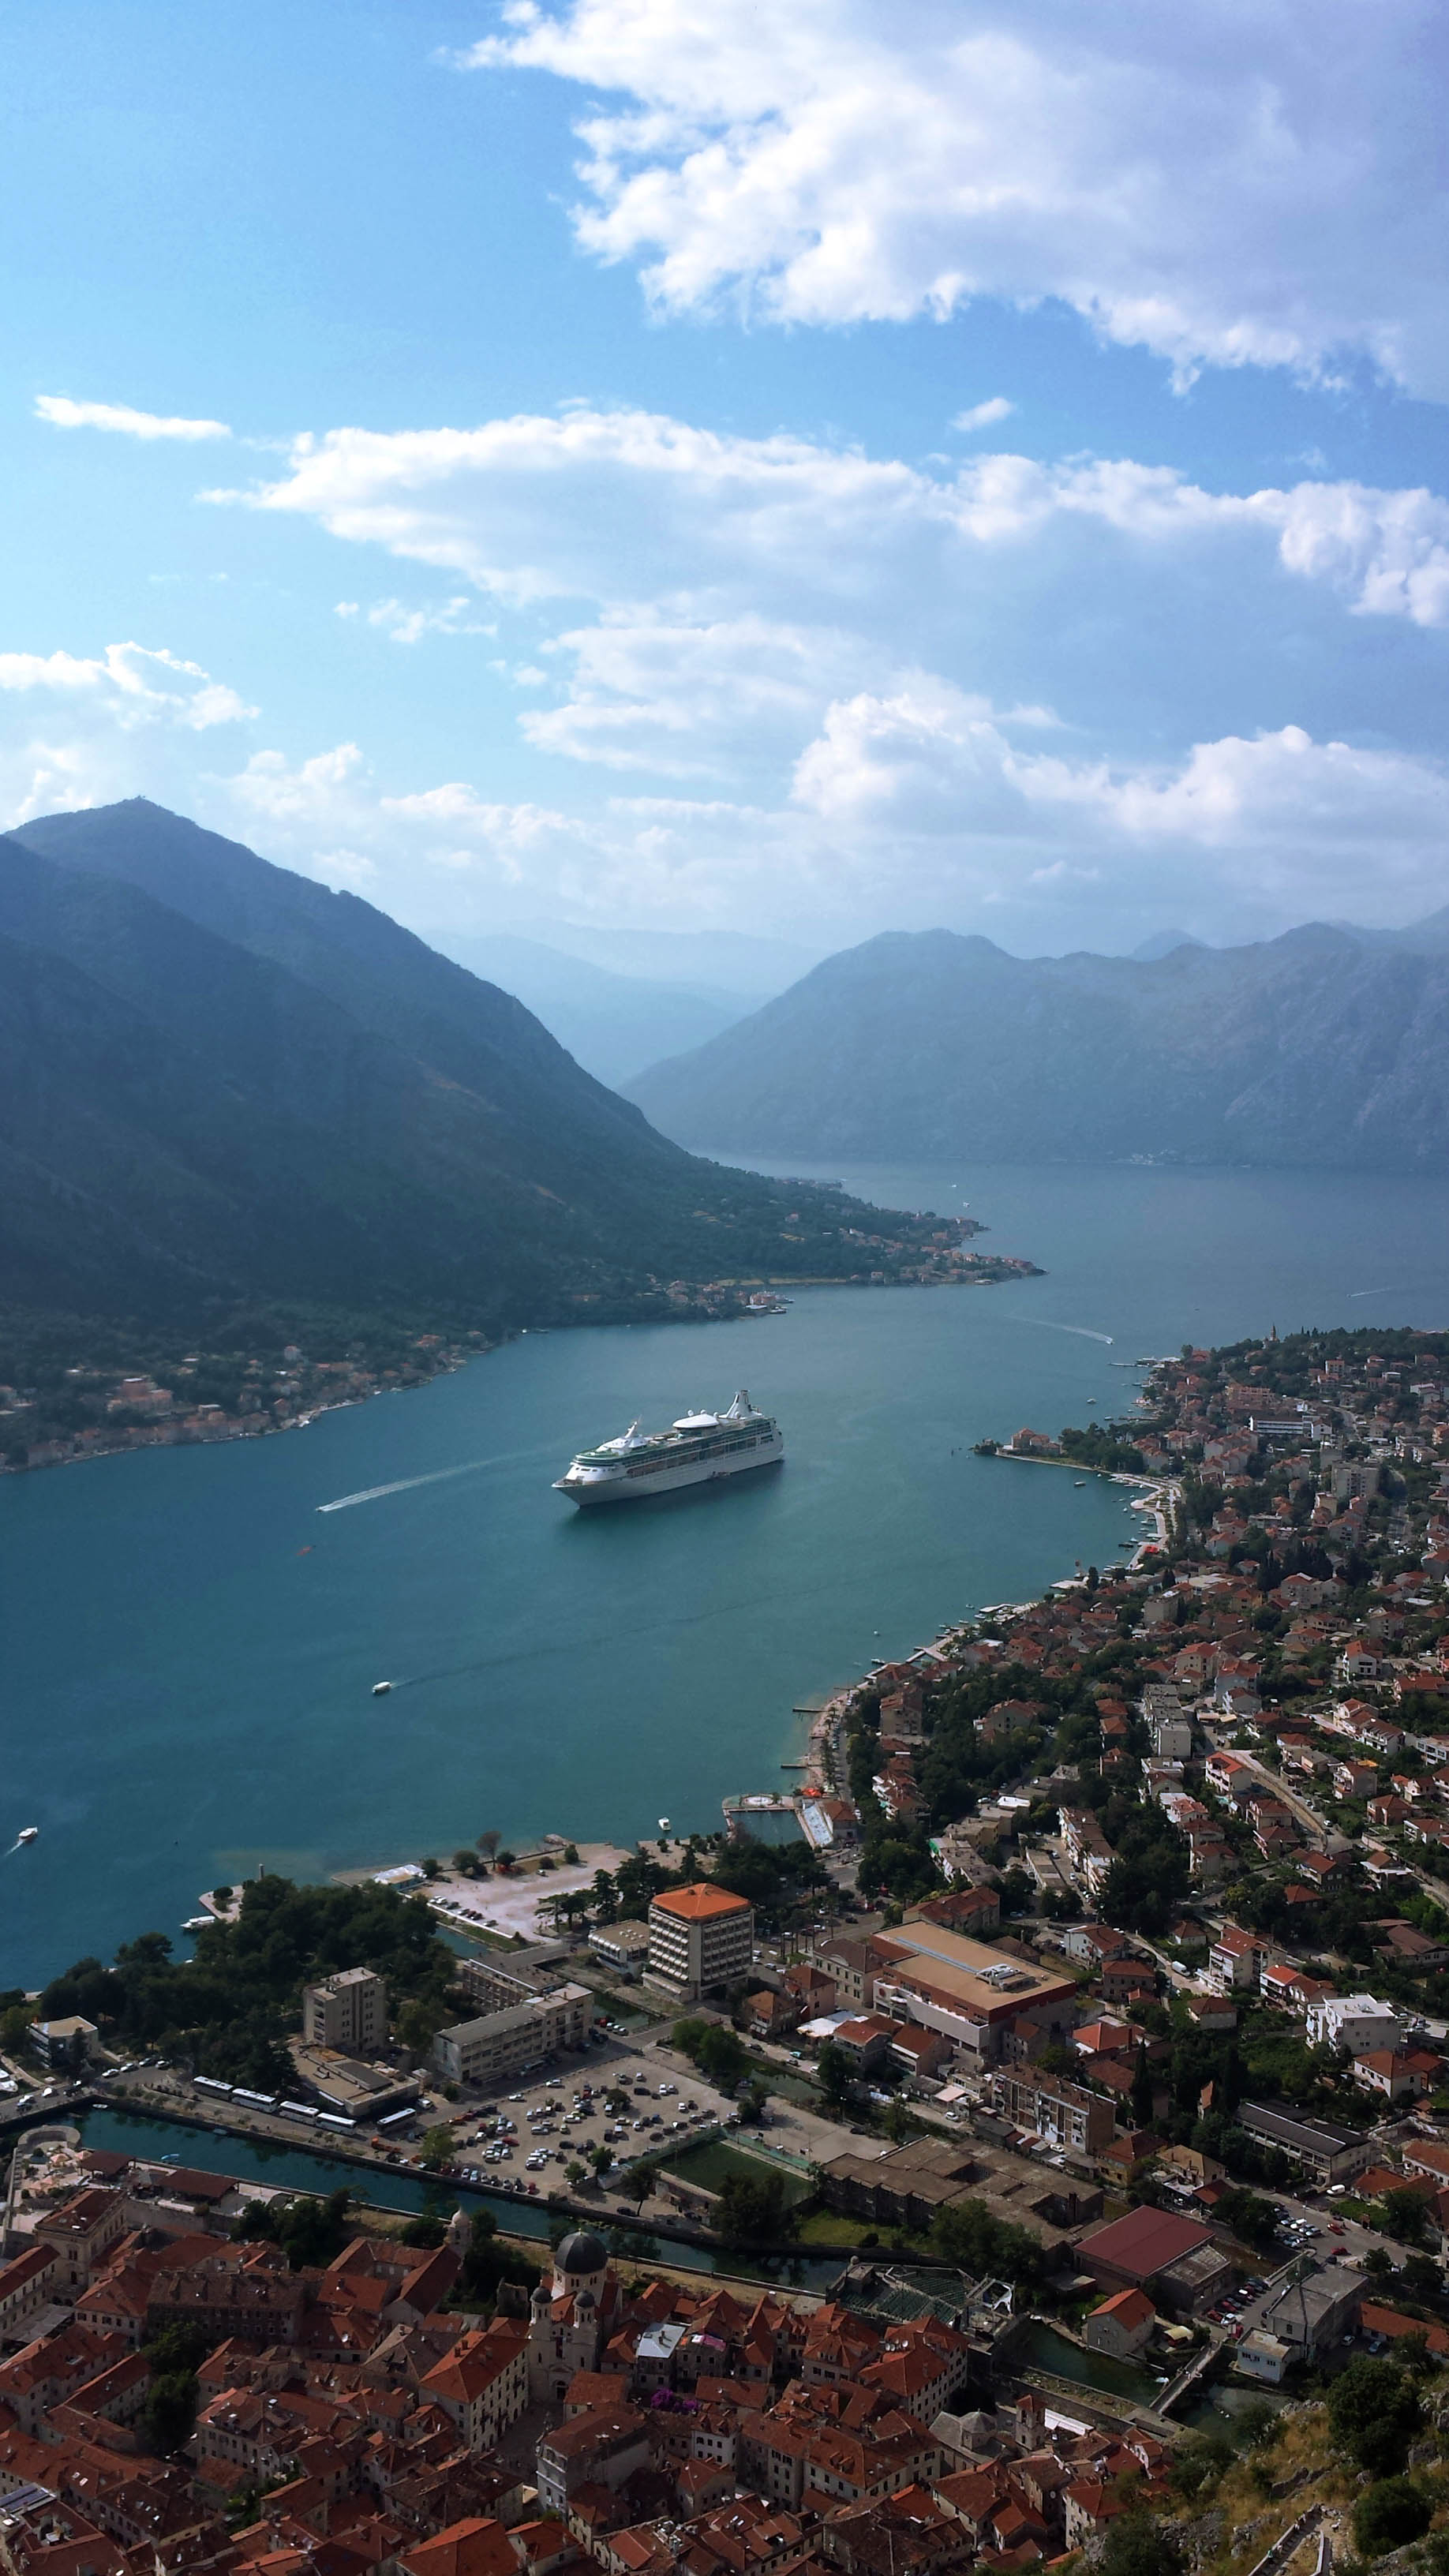 Vision of the Seas anchored in Kotor, Montenegro, 